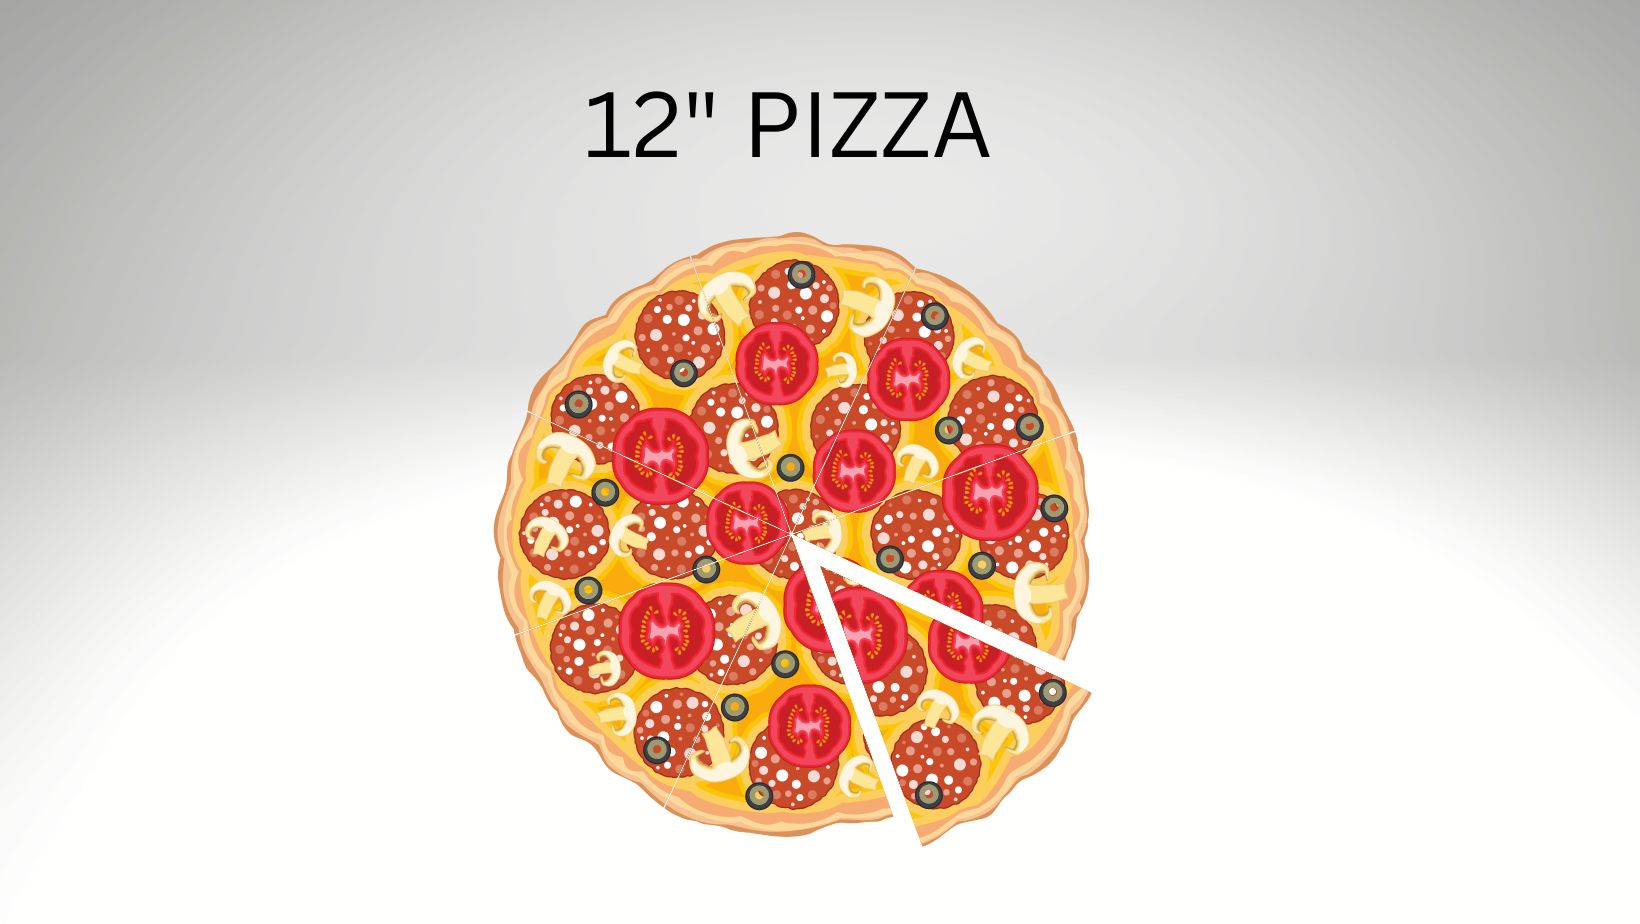 How Big Is A 12 Inch Pizza? How Many Slices in 12 Inch Pizza?